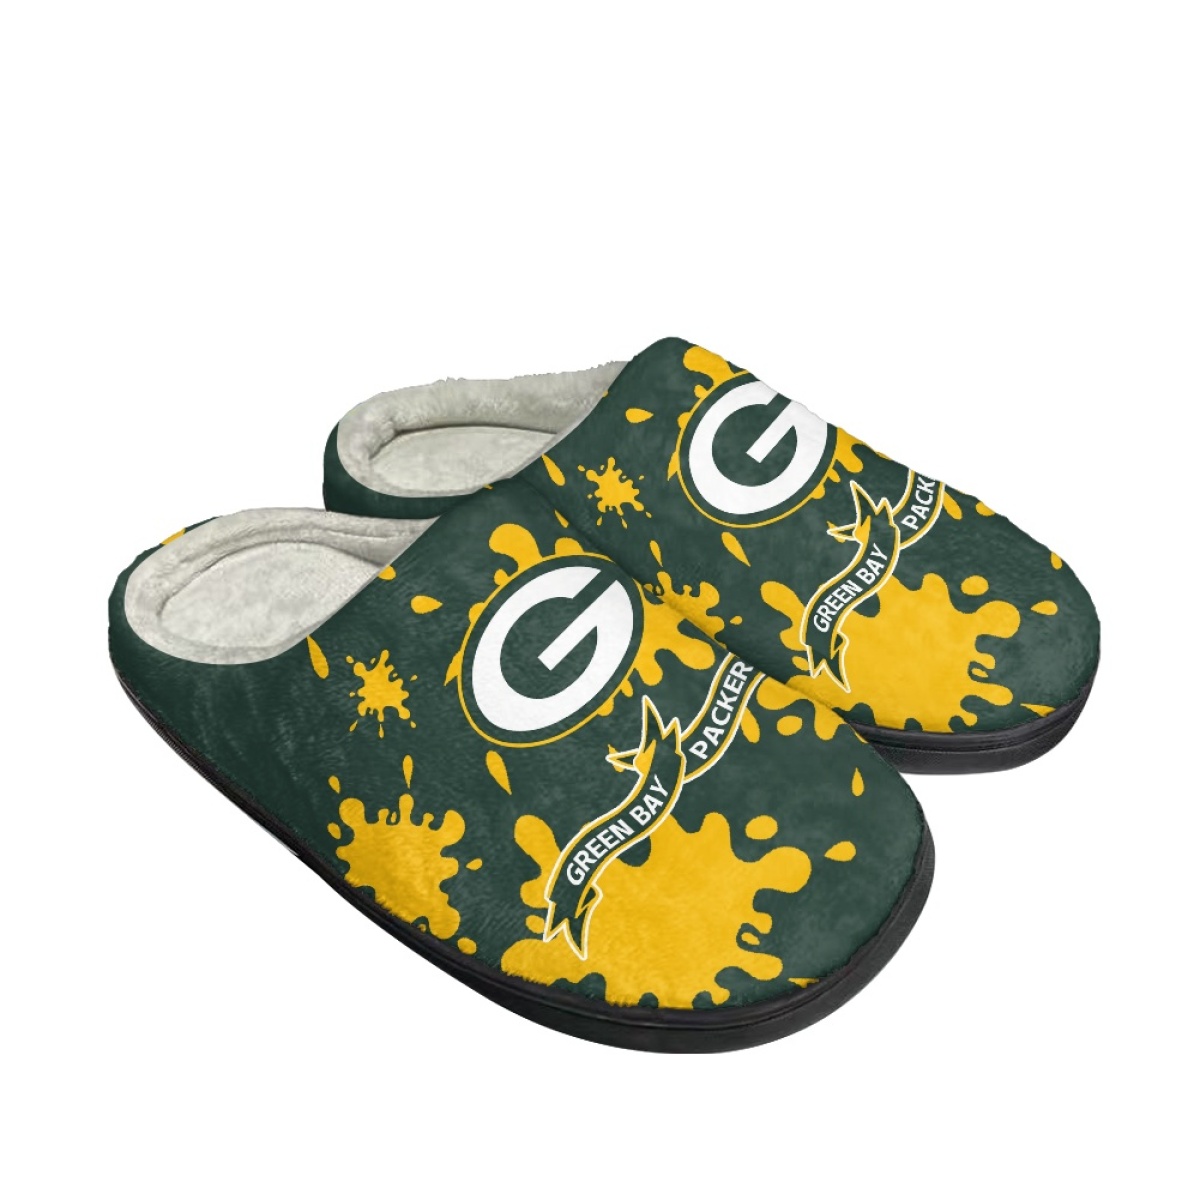 Men's Green Bay Packers Slippers/Shoes 005